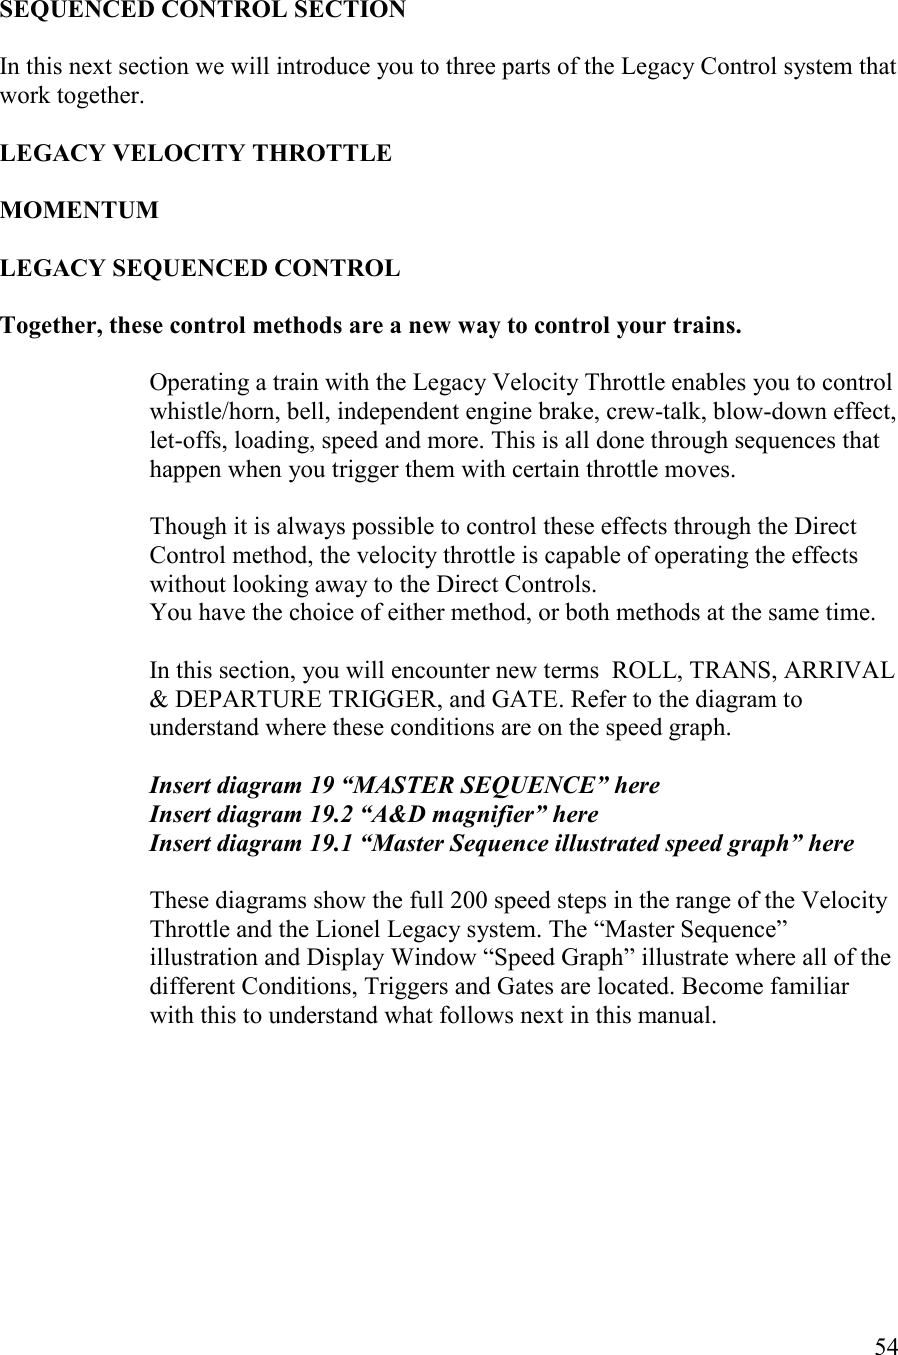   54   SEQUECED COTROL SECTIO  In this next section we will introduce you to three parts of the Legacy Control system that work together.   LEGACY VELOCITY THROTTLE  MOMETUM  LEGACY SEQUECED COTROL  Together, these control methods are a new way to control your trains.  Operating a train with the Legacy Velocity Throttle enables you to control whistle/horn, bell, independent engine brake, crew-talk, blow-down effect, let-offs, loading, speed and more. This is all done through sequences that happen when you trigger them with certain throttle moves.   Though it is always possible to control these effects through the Direct Control method, the velocity throttle is capable of operating the effects without looking away to the Direct Controls. You have the choice of either method, or both methods at the same time.  In this section, you will encounter new terms  ROLL, TRANS, ARRIVAL &amp; DEPARTURE TRIGGER, and GATE. Refer to the diagram to understand where these conditions are on the speed graph.   Insert diagram 19 “MASTER SEQUECE” here Insert diagram 19.2 “A&amp;D magnifier” here Insert diagram 19.1 “Master Sequence illustrated speed graph” here  These diagrams show the full 200 speed steps in the range of the Velocity Throttle and the Lionel Legacy system. The “Master Sequence” illustration and Display Window “Speed Graph” illustrate where all of the different Conditions, Triggers and Gates are located. Become familiar with this to understand what follows next in this manual. 